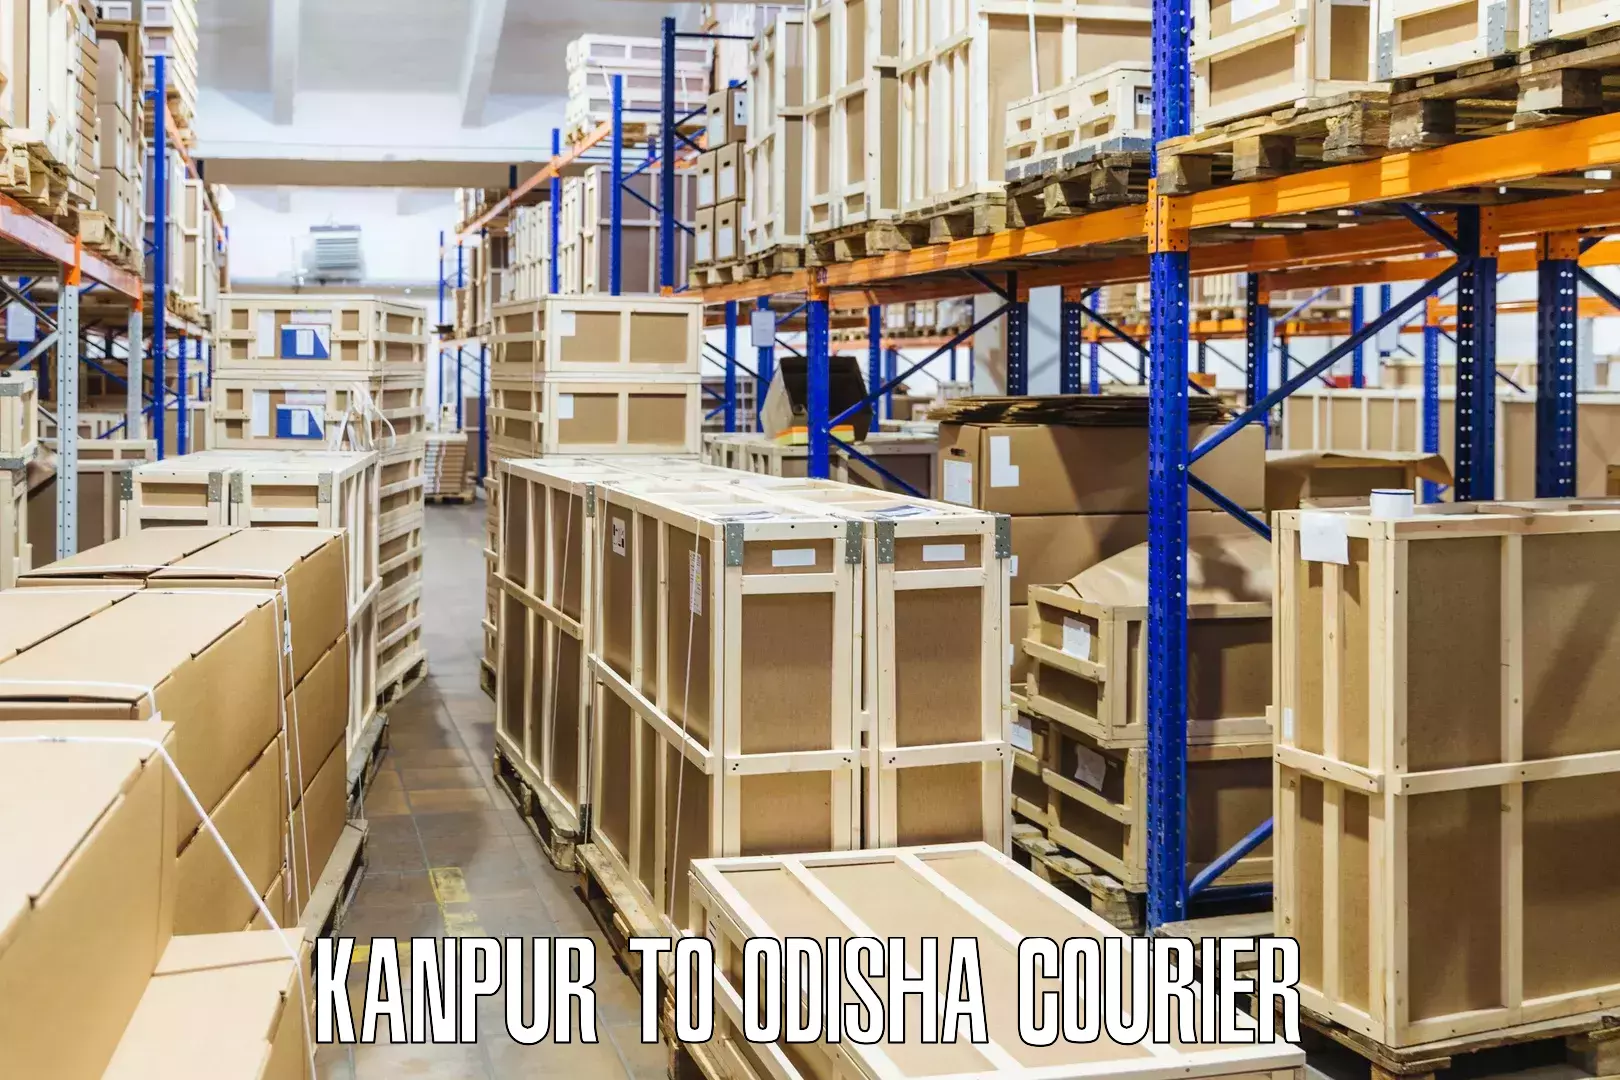 Courier service partnerships Kanpur to Chandipur